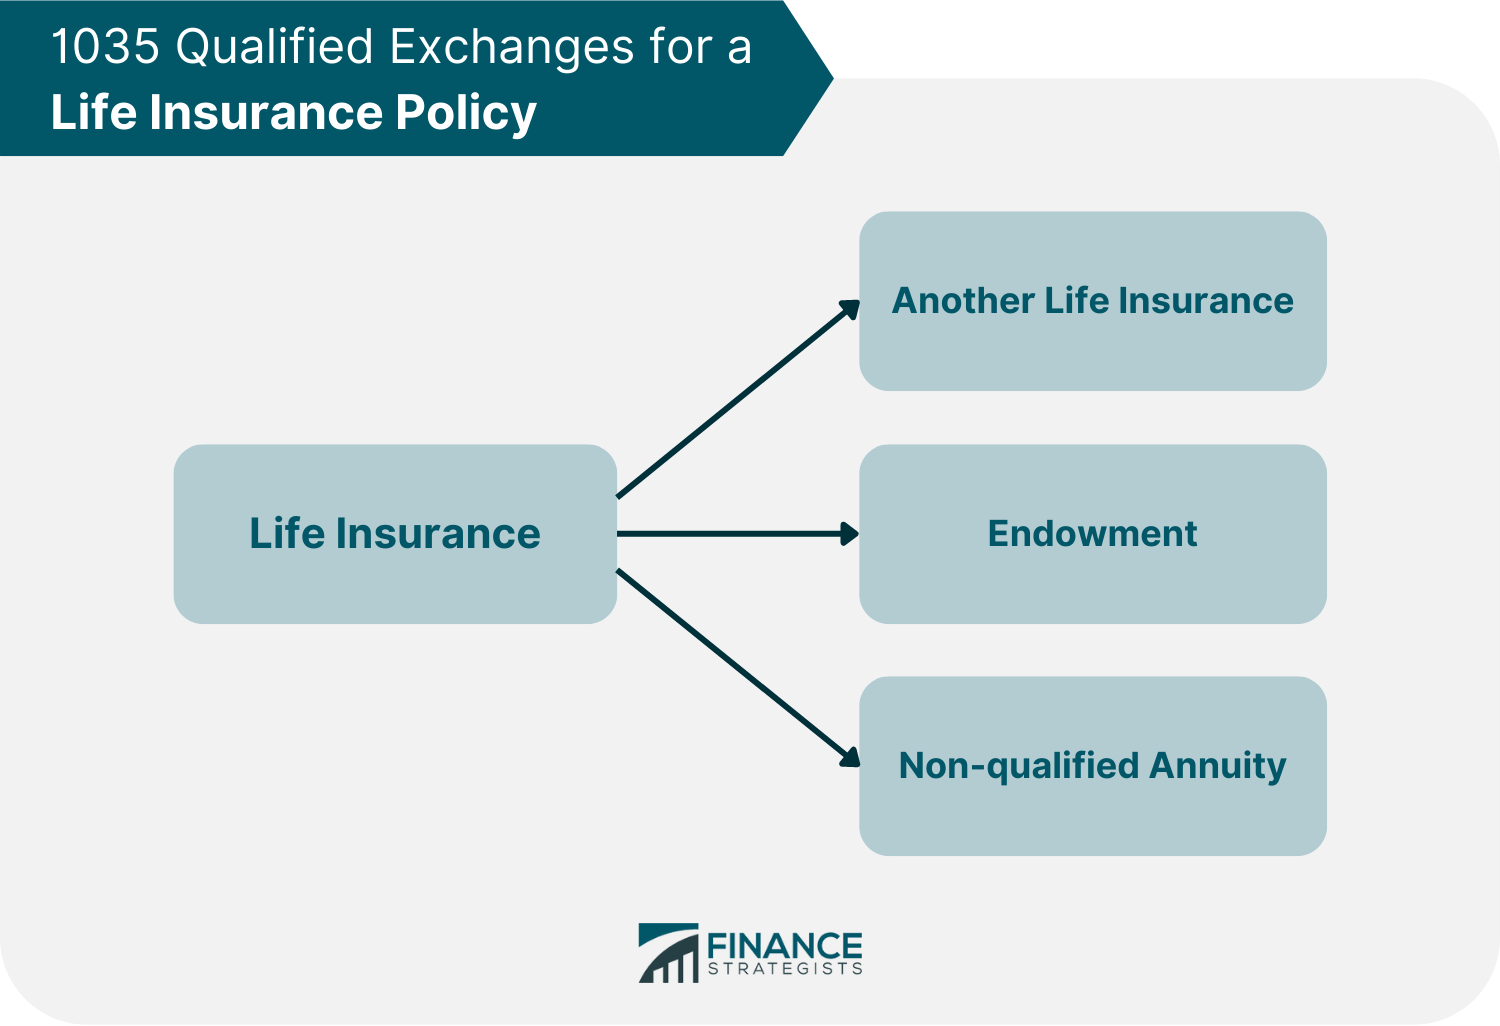 1035_Qualified_Exchanges_for_a_Life_Insurance_Policy